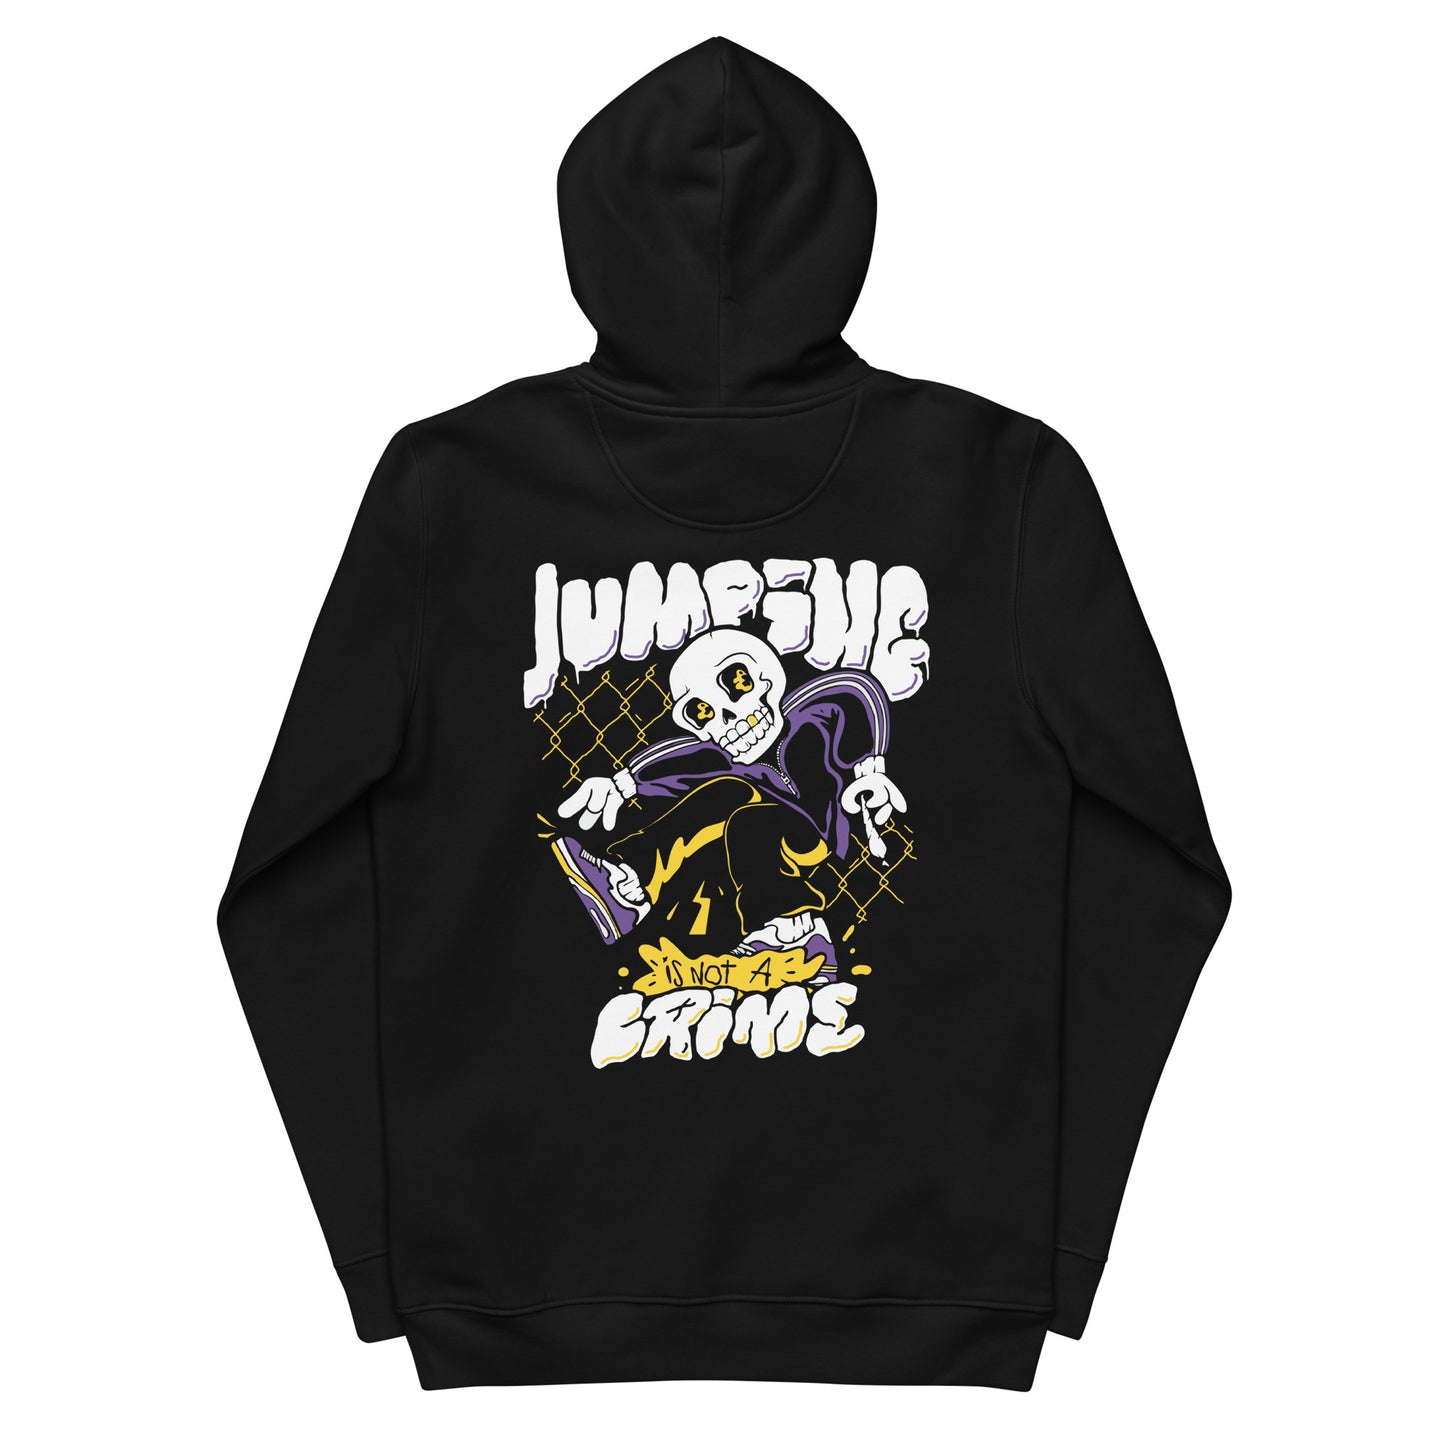 Jumping is not a crime | Unisex hoodie